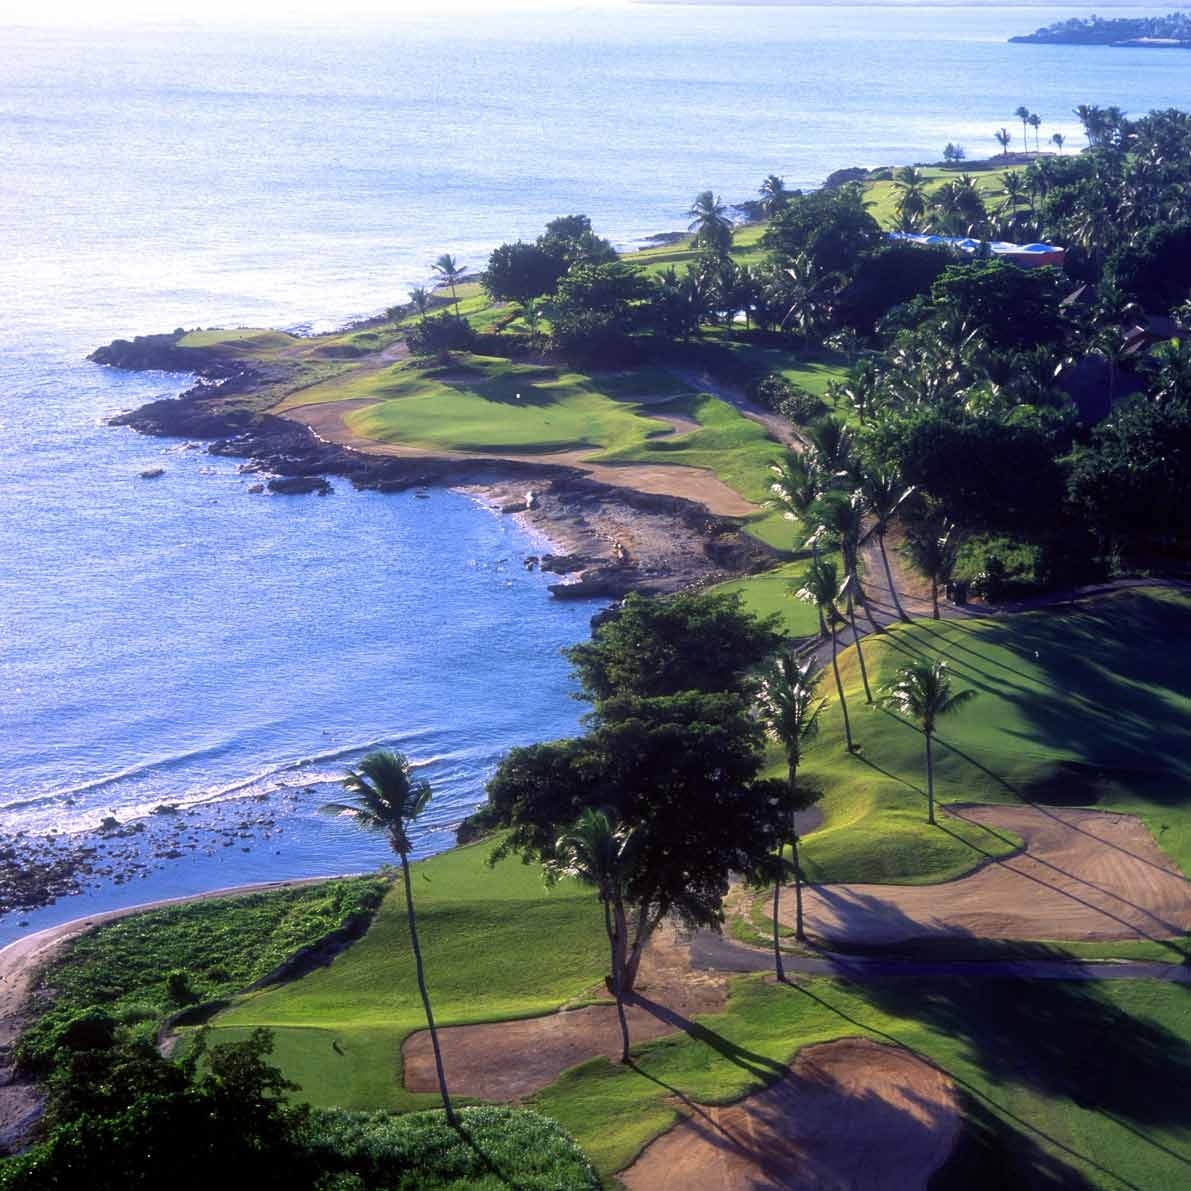 Golf Vacation Package - Time for your Group Getaway? Casa de Campo Villa & Teeth Of The Dog from $739 per day!